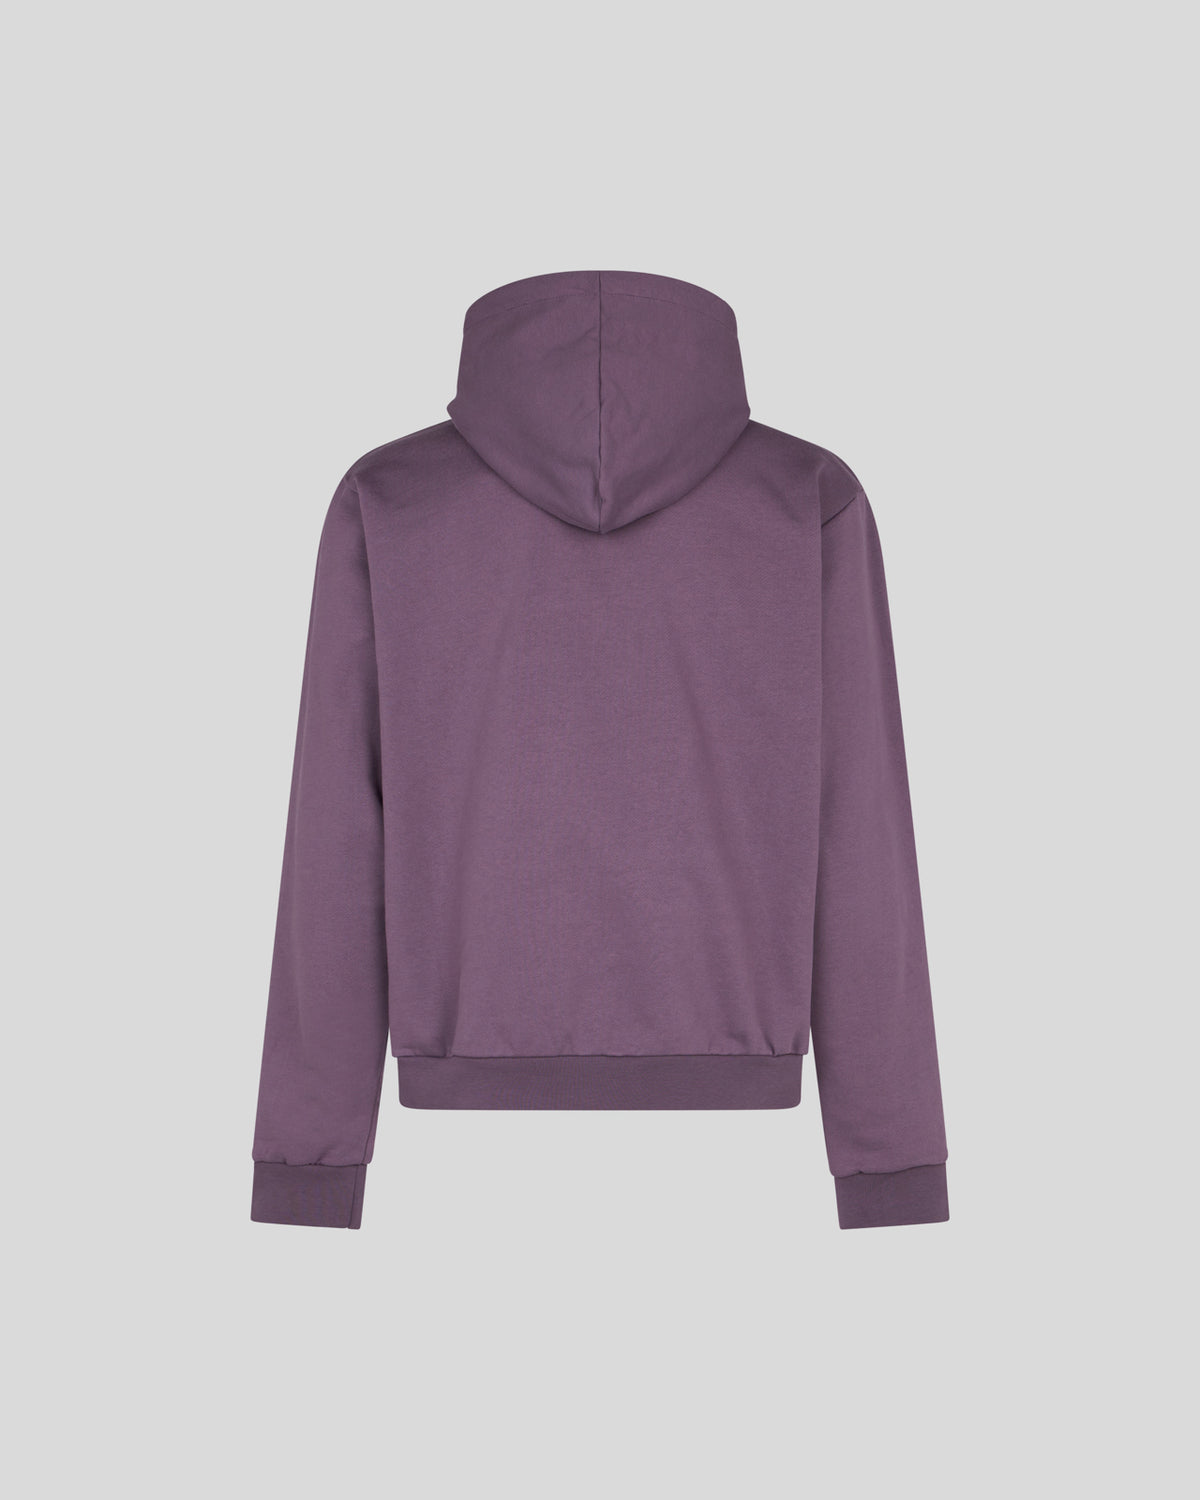 PHOBIA BLUE HOODIE WITH PURPLE EMBROIDERY LIGHTNING